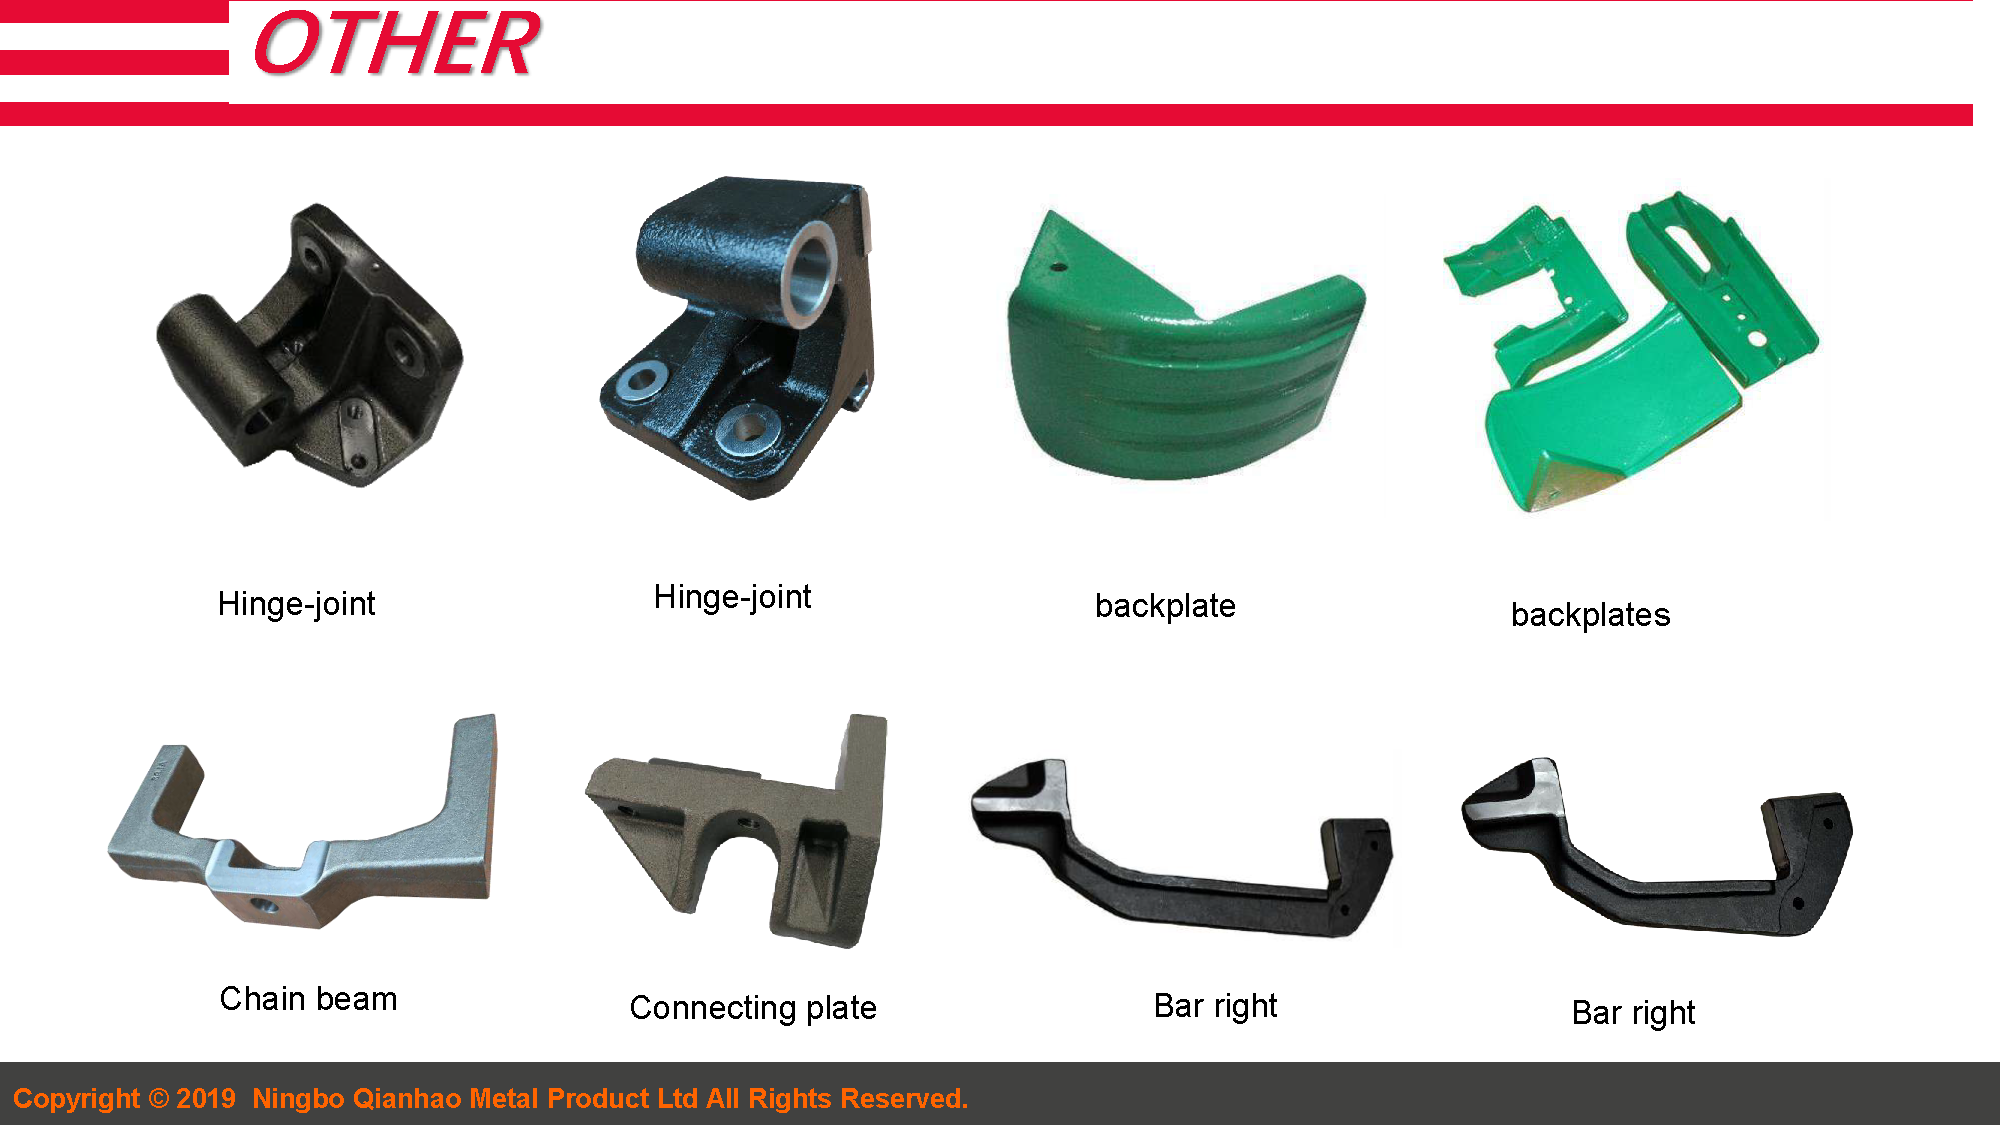 2.Forklift Components Capacity Introduction 19.4.9(图24)